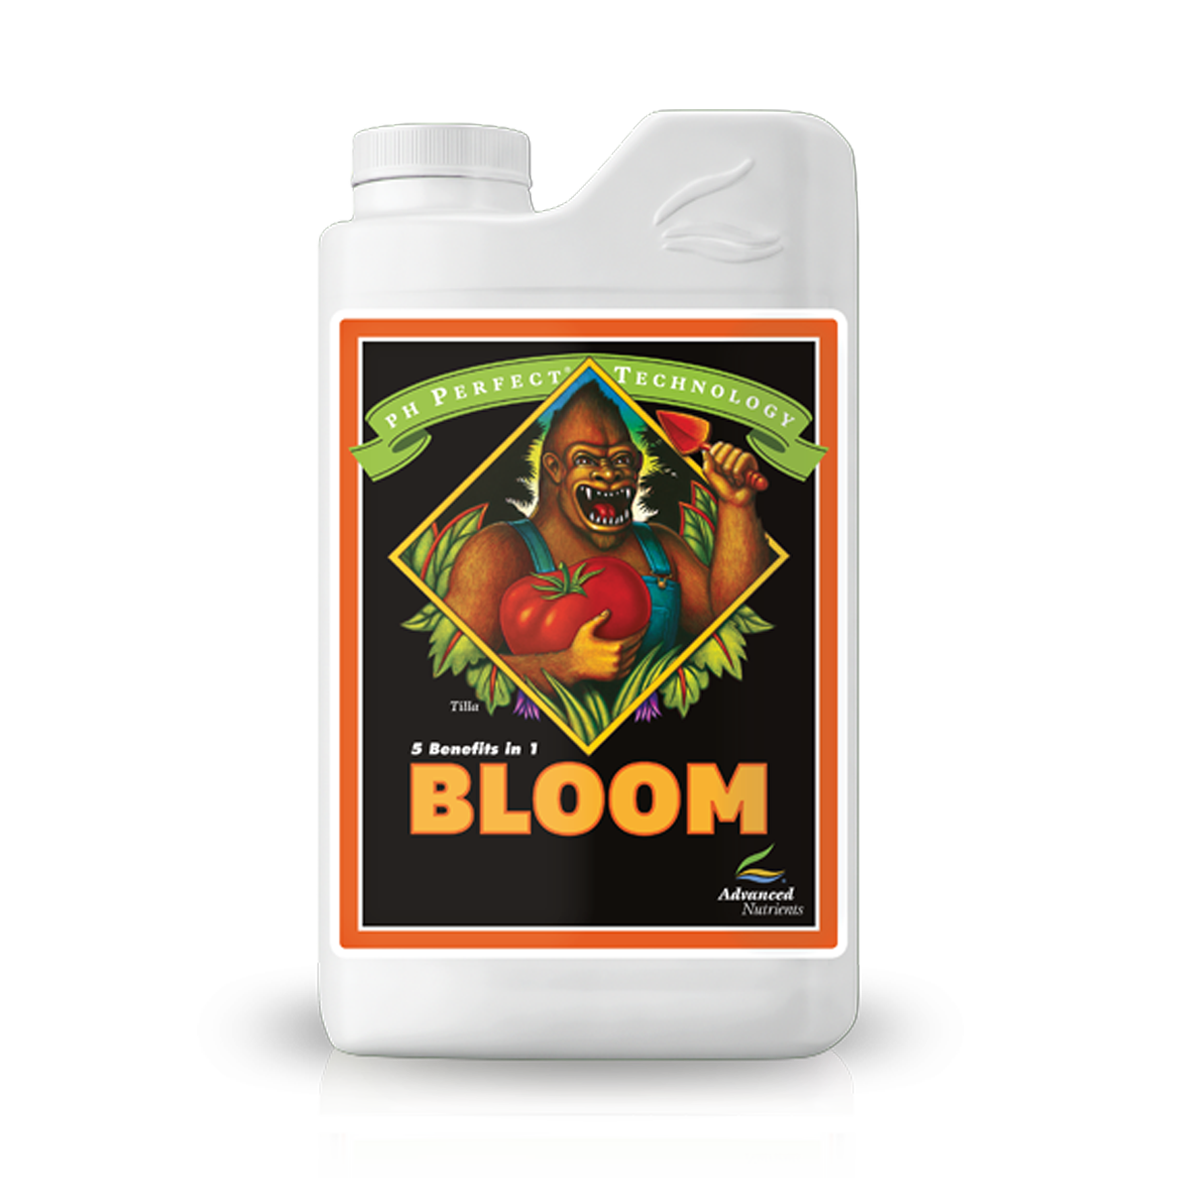 pH Perfect Bloom - Advanced Nutrients